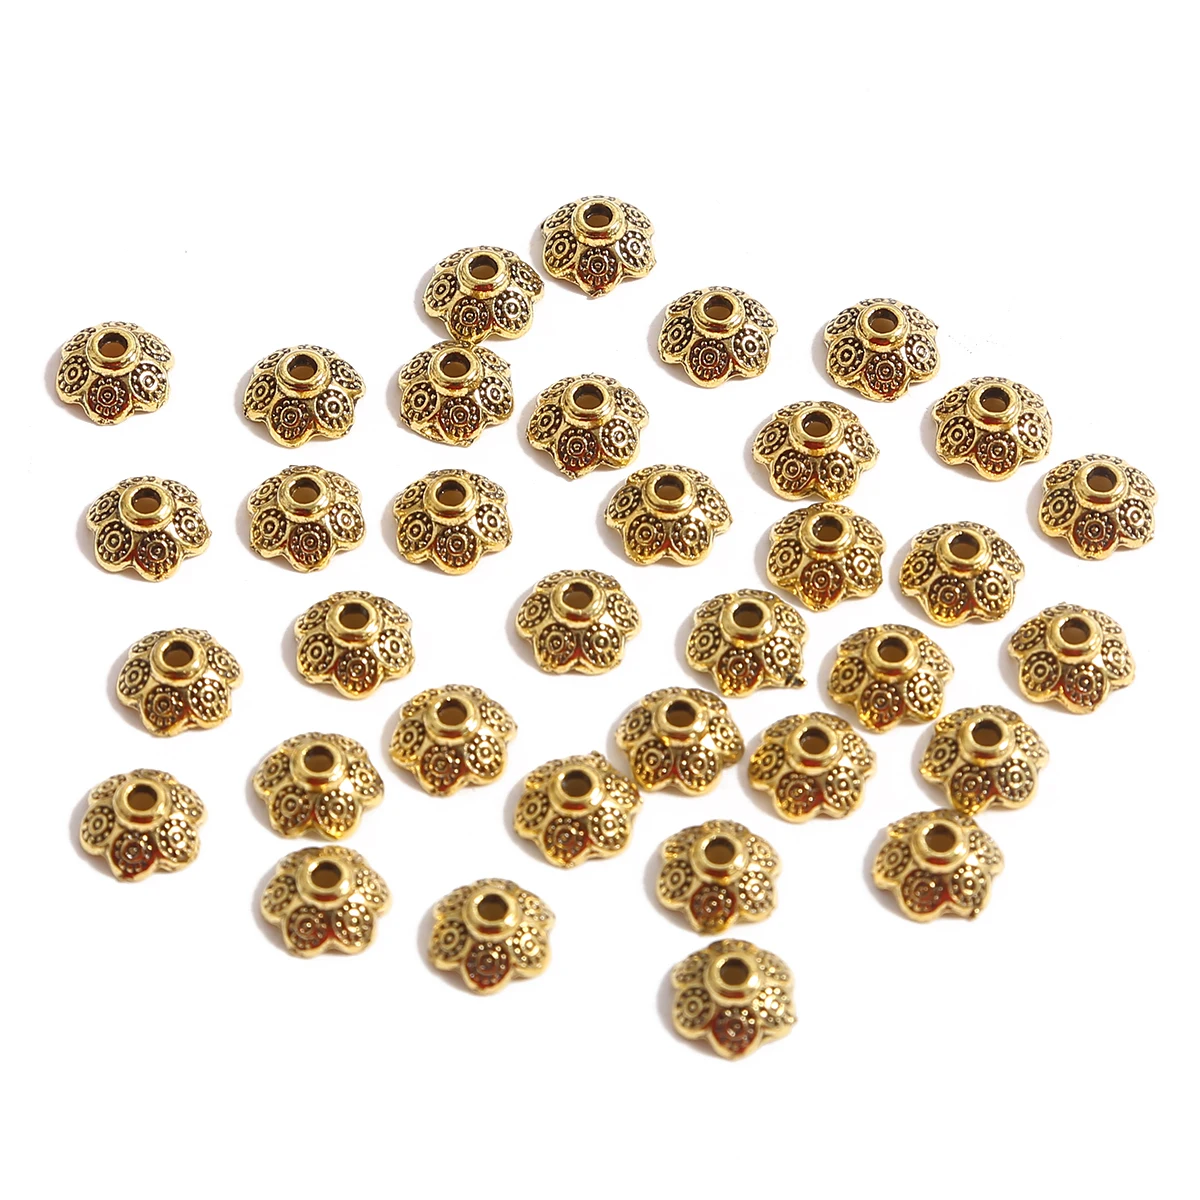 High Quality 50pcs/lot Antique Mixed Gold Flower Spacer Bead End For ...